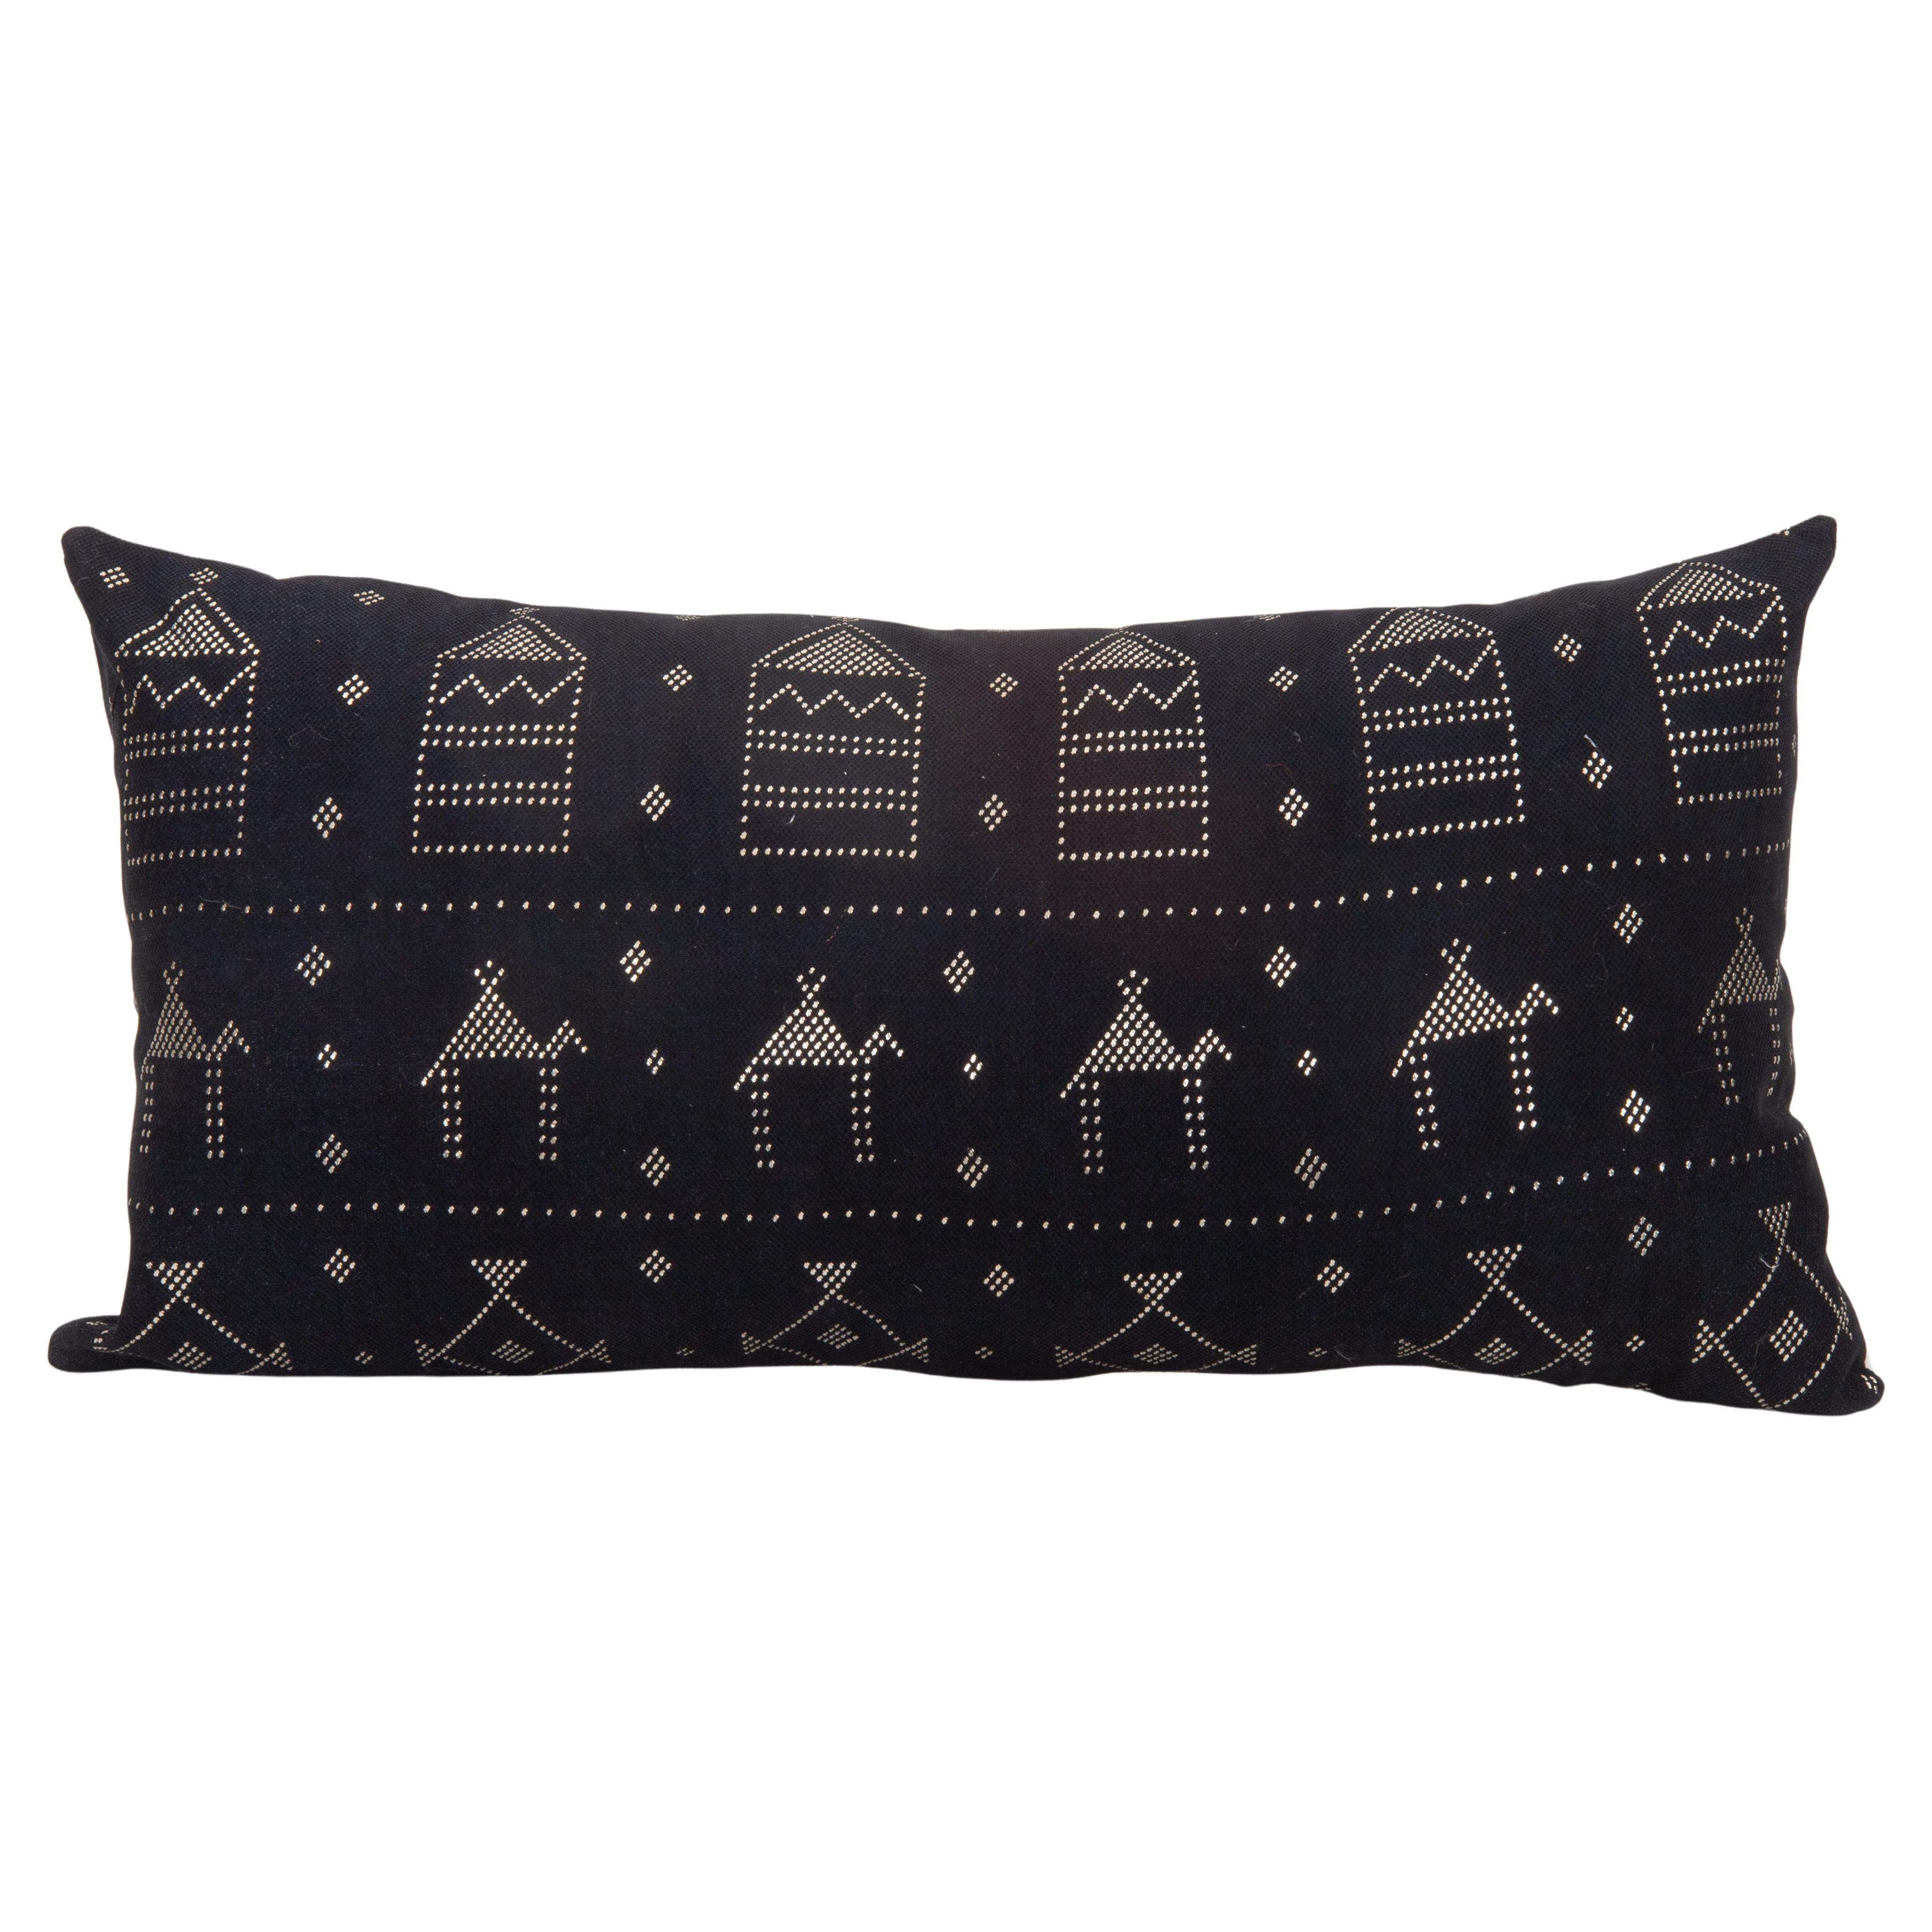 Pillow Cover Fashioned from  Vintage Egyptian ‘tulli bi telli’, Assuit Textile For Sale